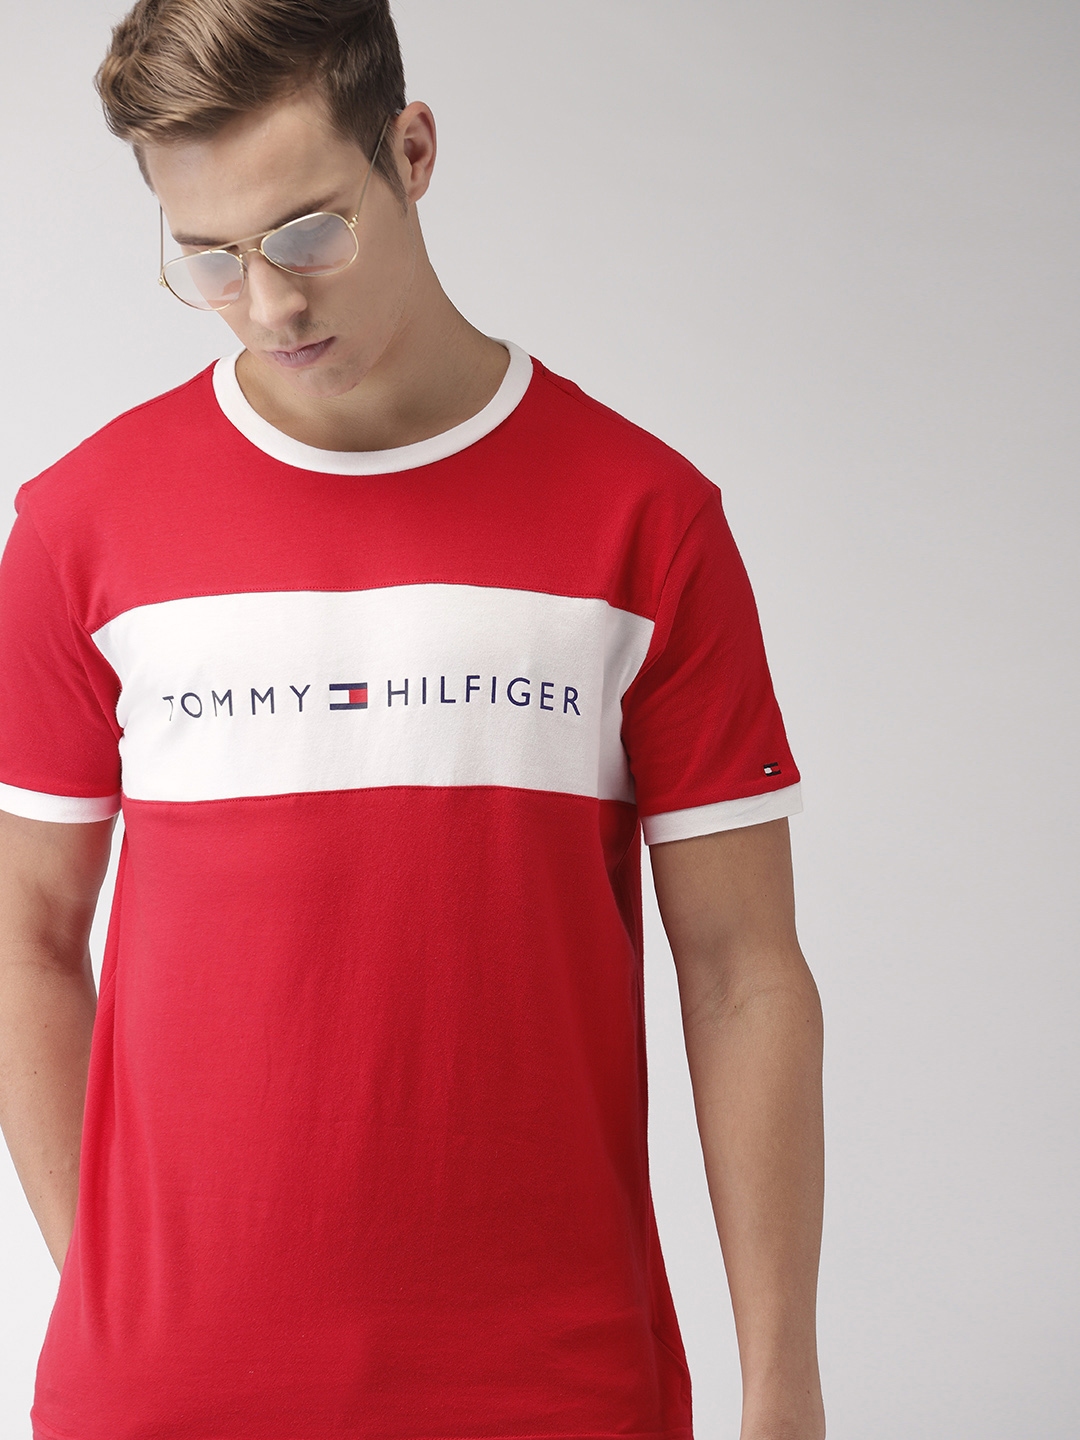 Buy Tommy Hilfiger Men Red & White Colourblocked Round Neck T Shirt ...